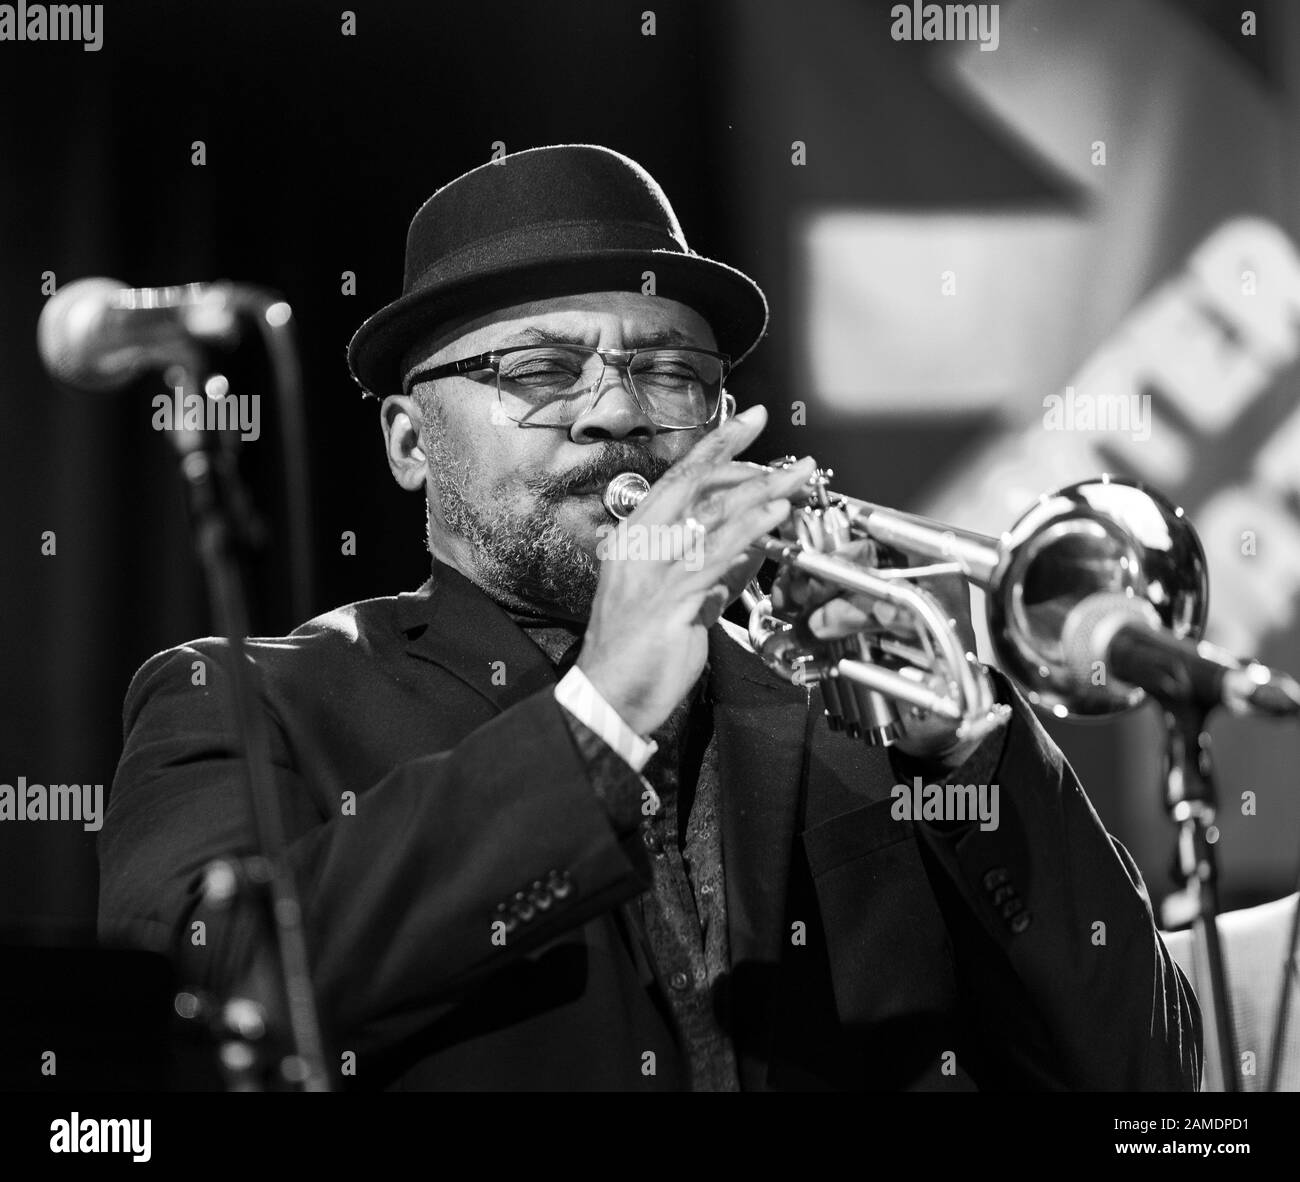 New York, NY - January 12, 2020: Dwight Adams performs during From Detroit to the World concert celebrating Marcus Belgrave as part of Winter Jazz Festival at (le) Poisson Rouge Stock Photo